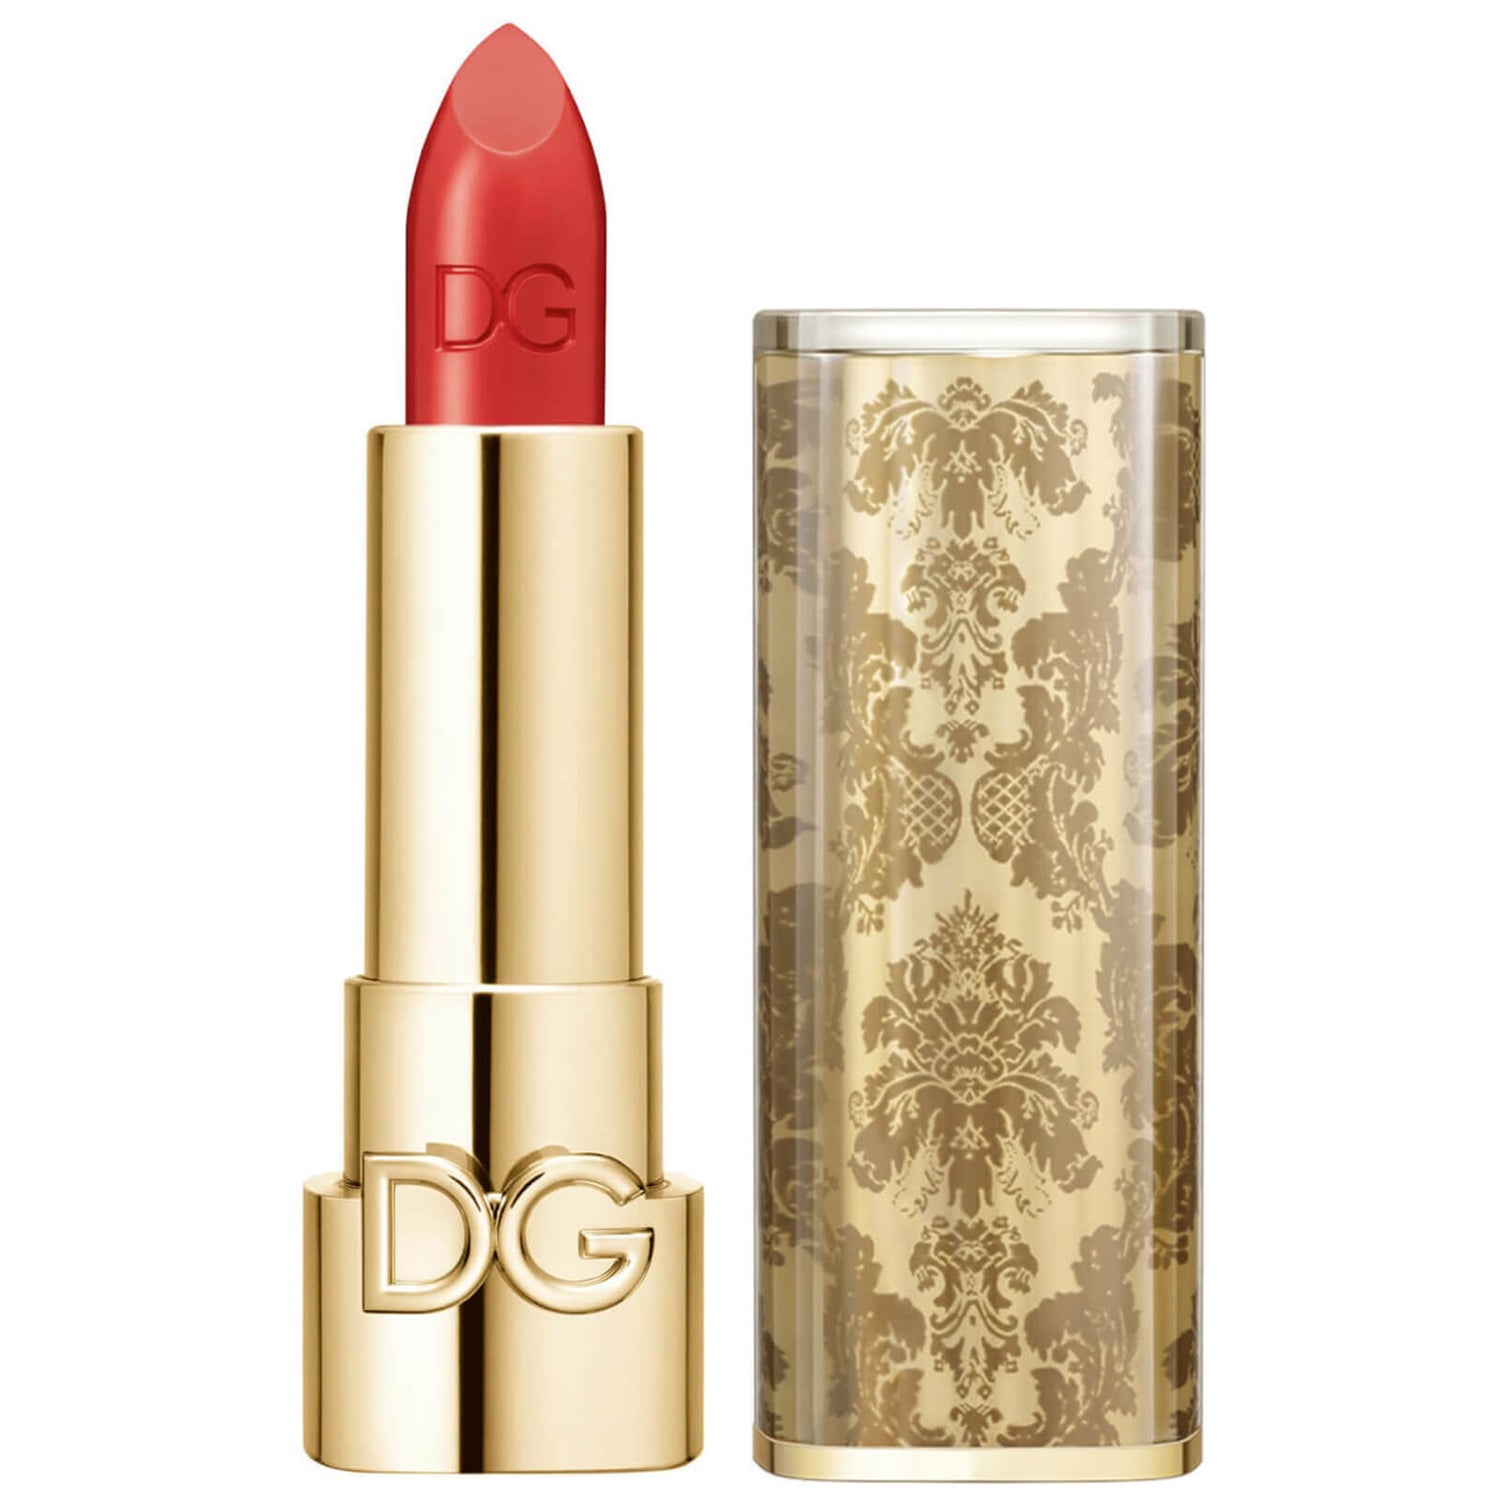 Dolce&Gabbana The Only One Lipstick + Cap (Damasco) (Various Shades)